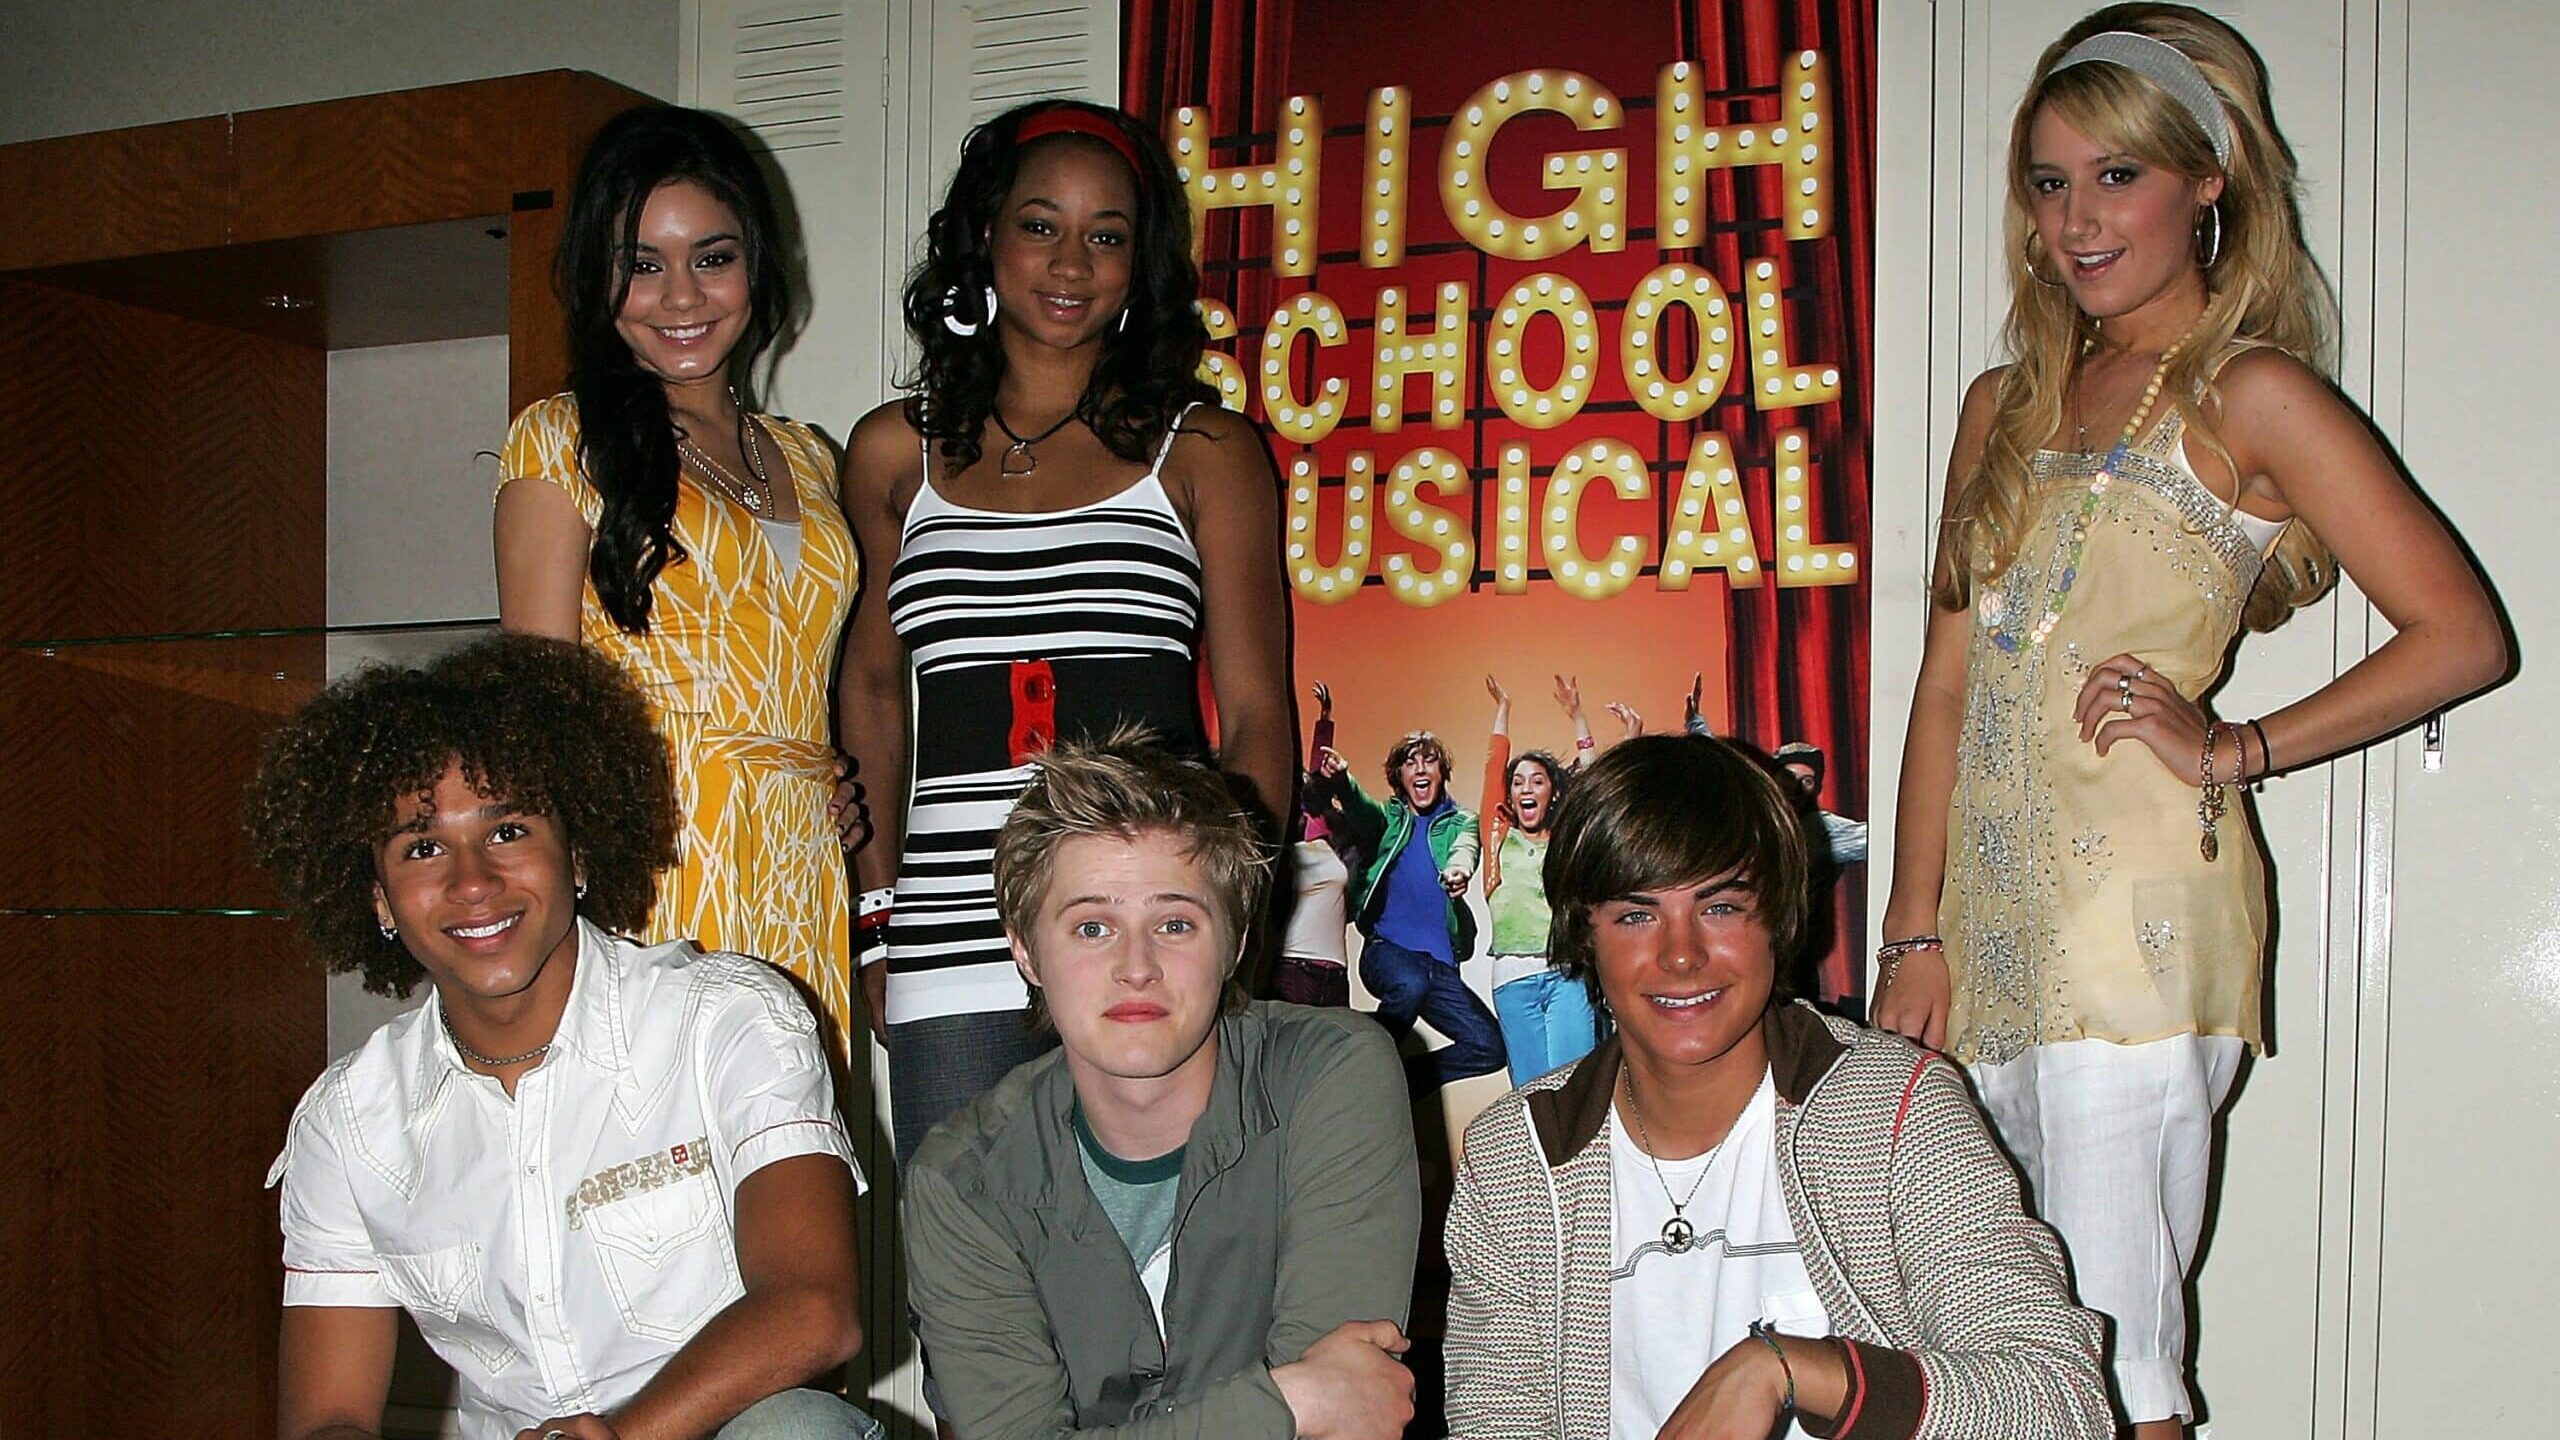 HOLLYWOOD - MAY 04: (L-R, standing) Actresses Vanessa Anne Hudgens, Monique Coleman and Ashley Tisdale, (L-R, kneeling) and actors Corbin Bleu, Lucas Grabeel and Zac Efron attend a Q&A session with the cast and producers of the Disney Channel and Walt Disney Home Entertainment's "High School Musical" at the Renaissance Hollywood Hotel on May 4, 2006 in Hollywood, California.